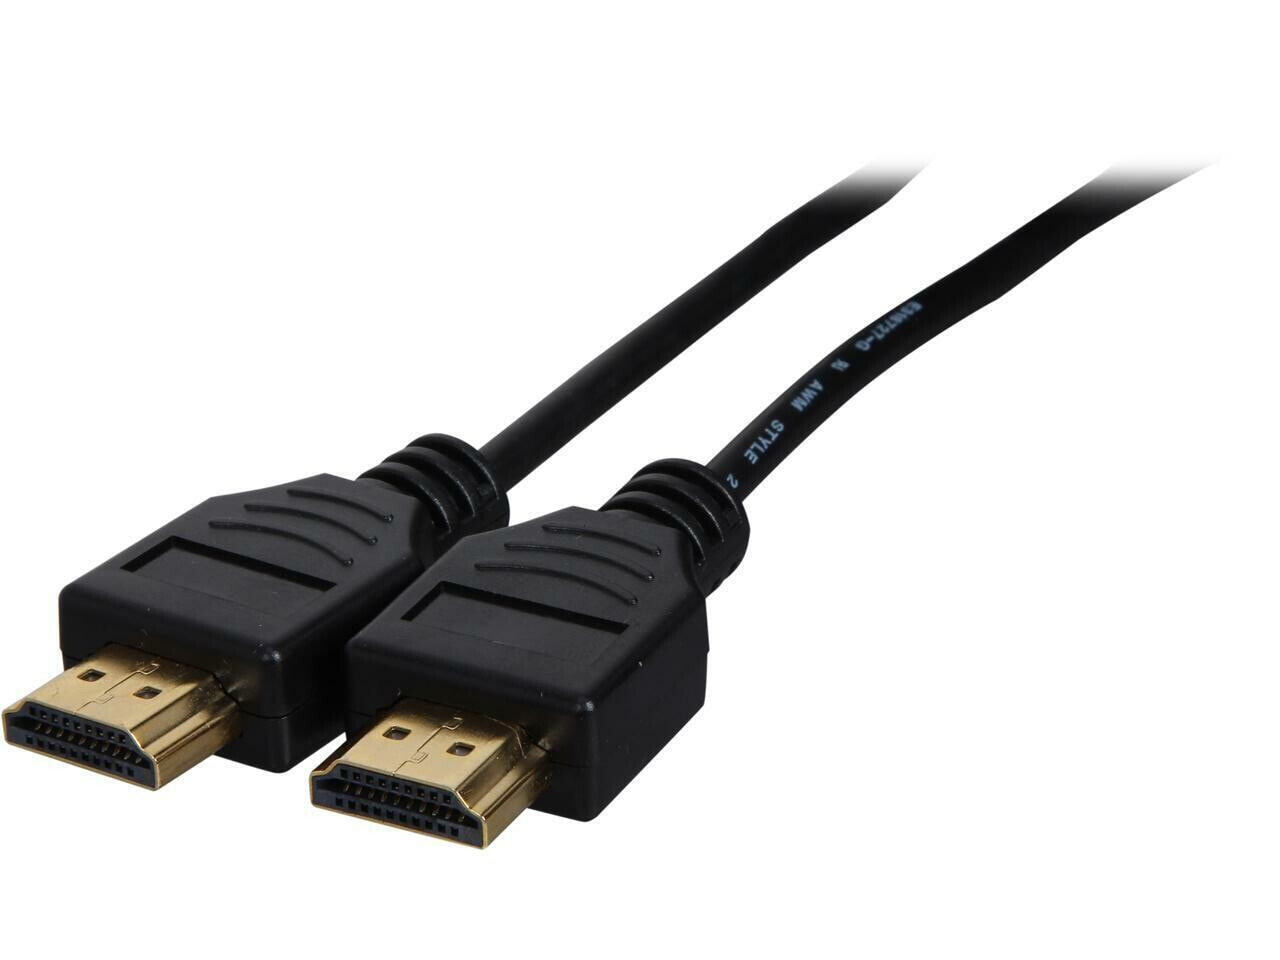 Nippon Labs Premium High Performance HDMI Cable 25 ft. HDMI TO HDMI Cable A/V Go